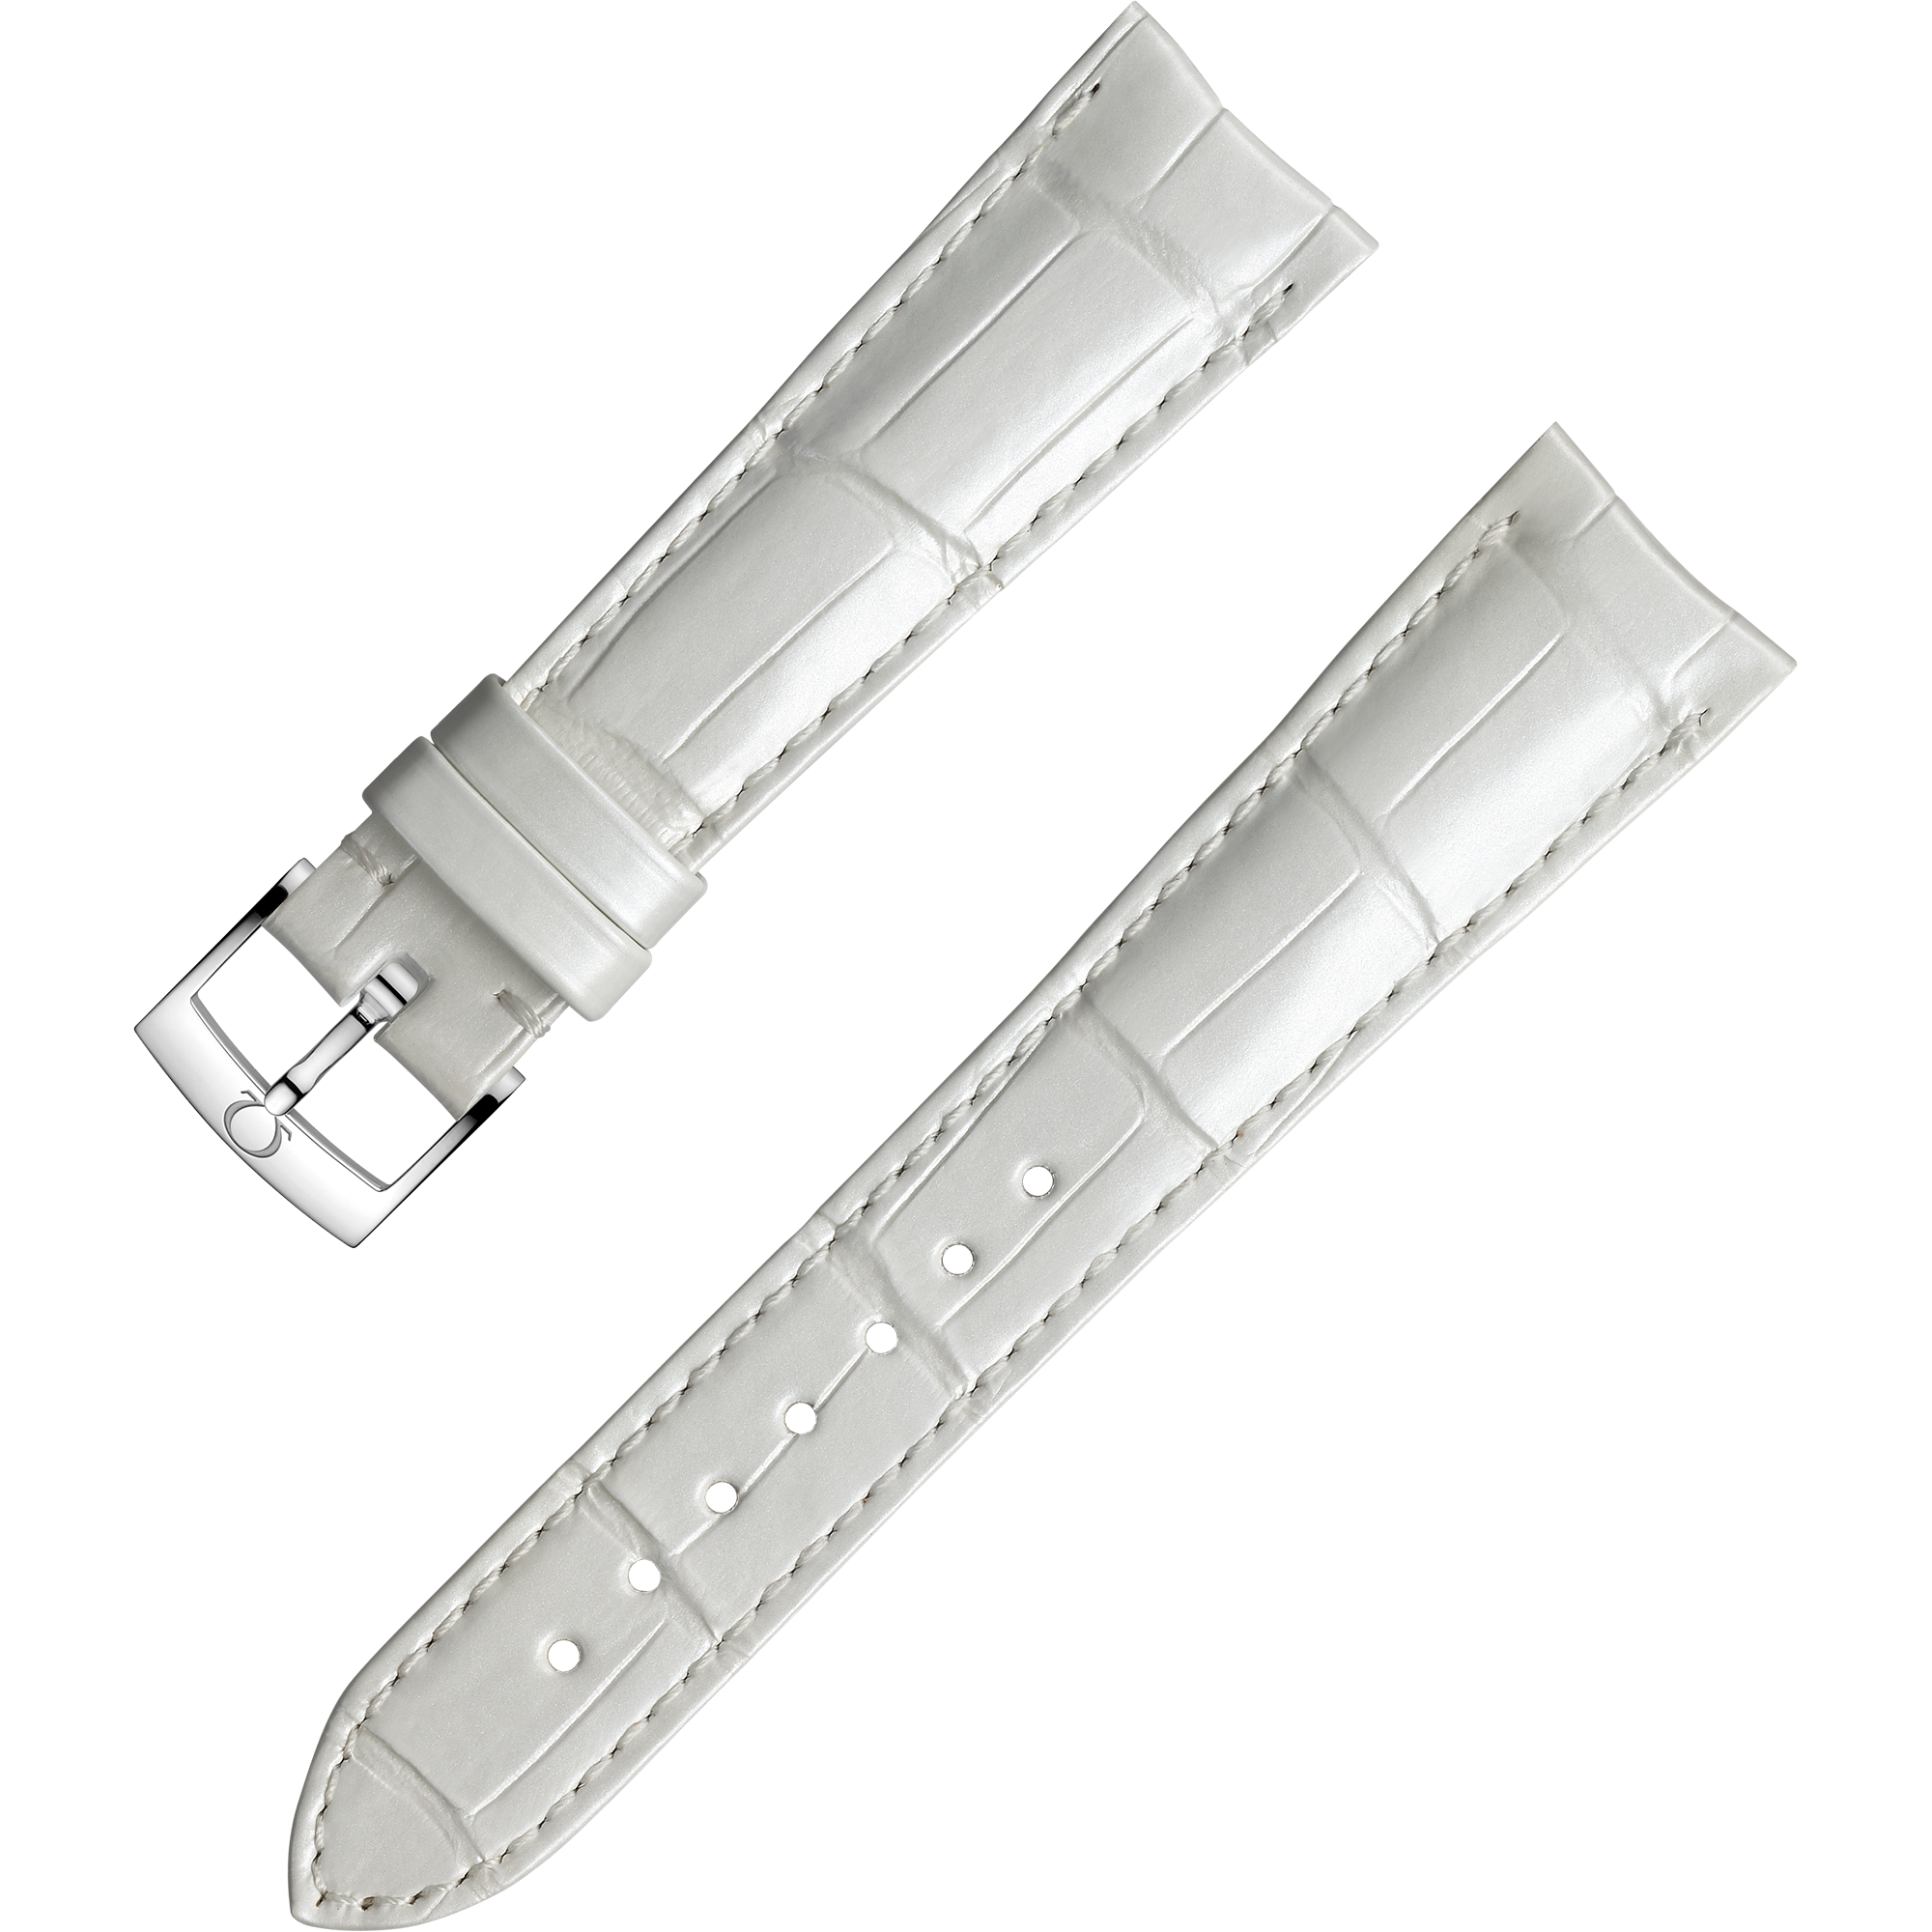 Two-piece strap - White alligator leather strap with pin buckle - 032CUZ003887W